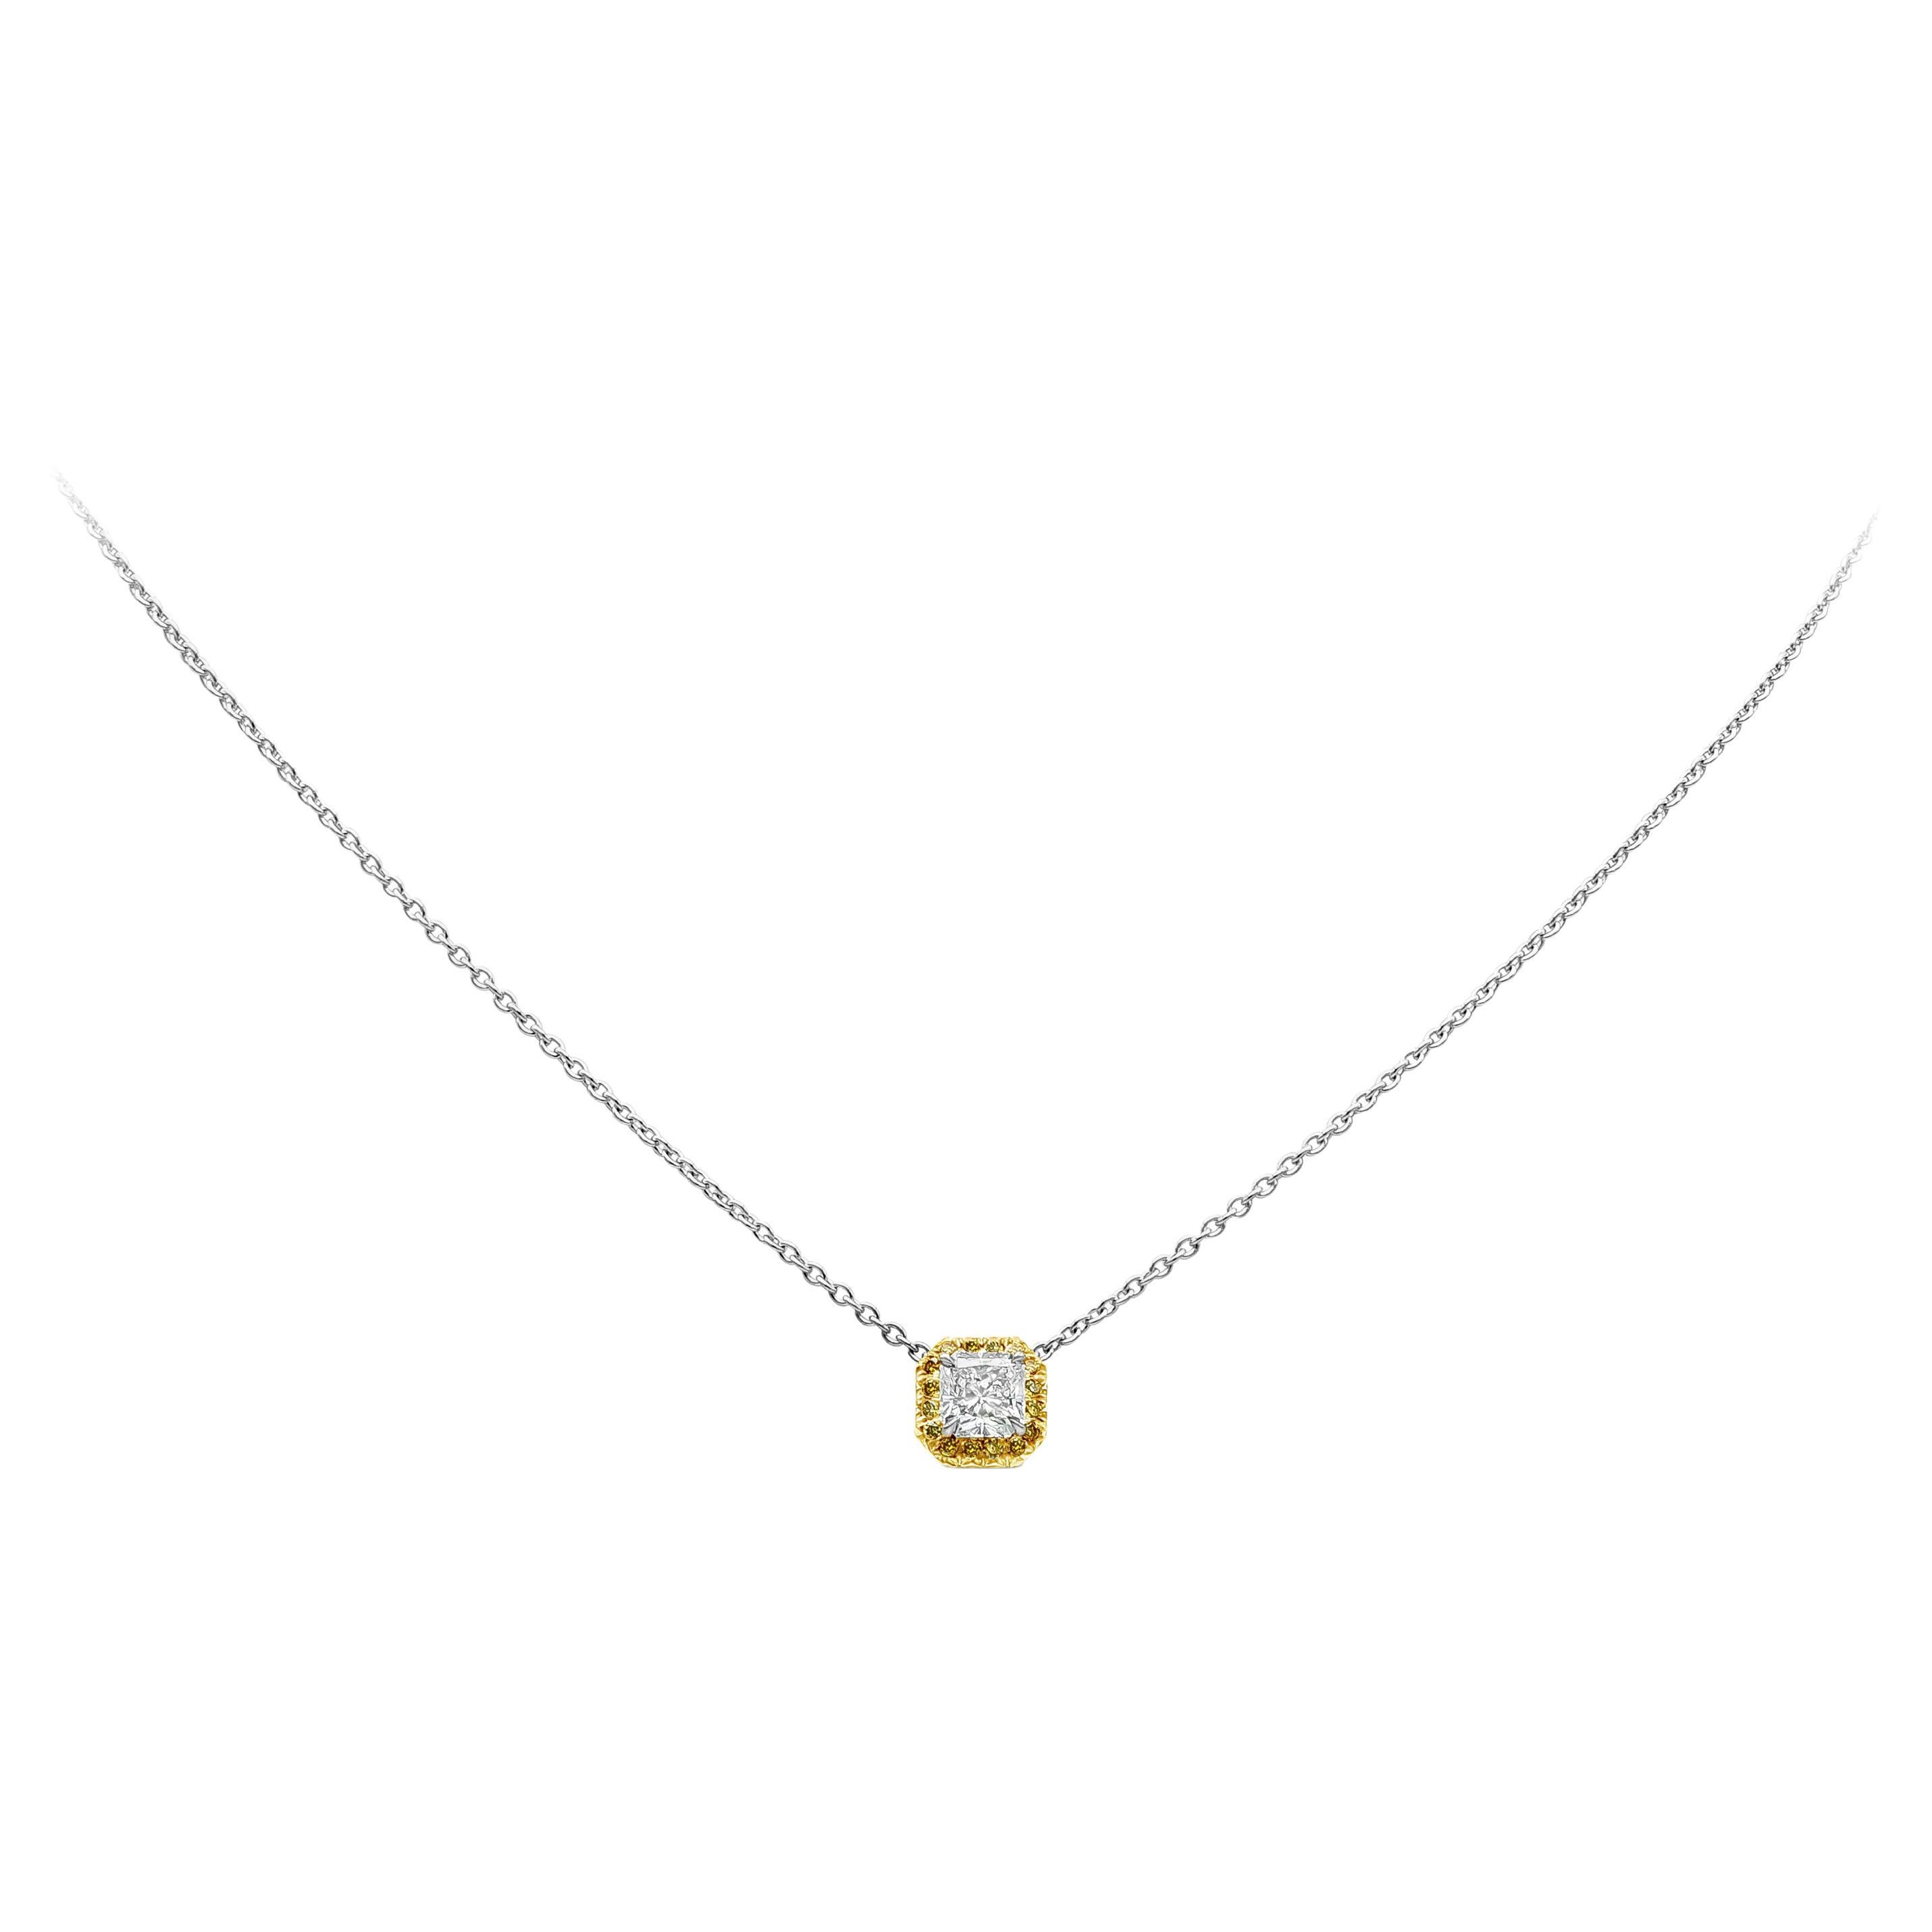 Roman Malakov, 1.02 Carat Total Weight Yellow Halo Pendant Necklace For Sale